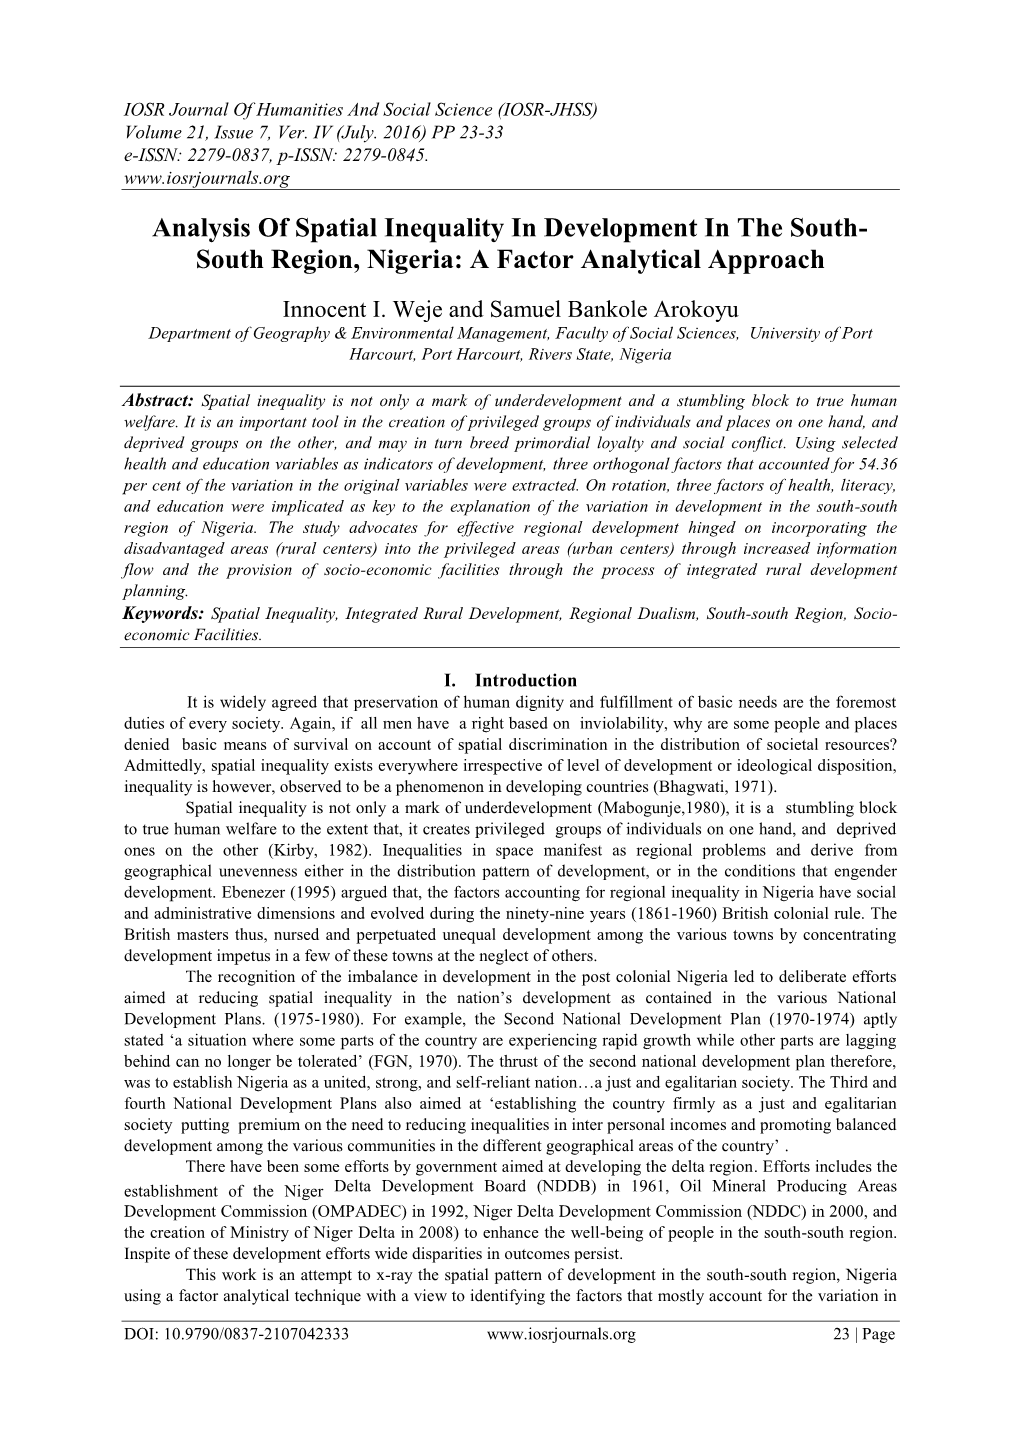 Analysis of Spatial Inequality in Development in the South- South Region, Nigeria: a Factor Analytical Approach